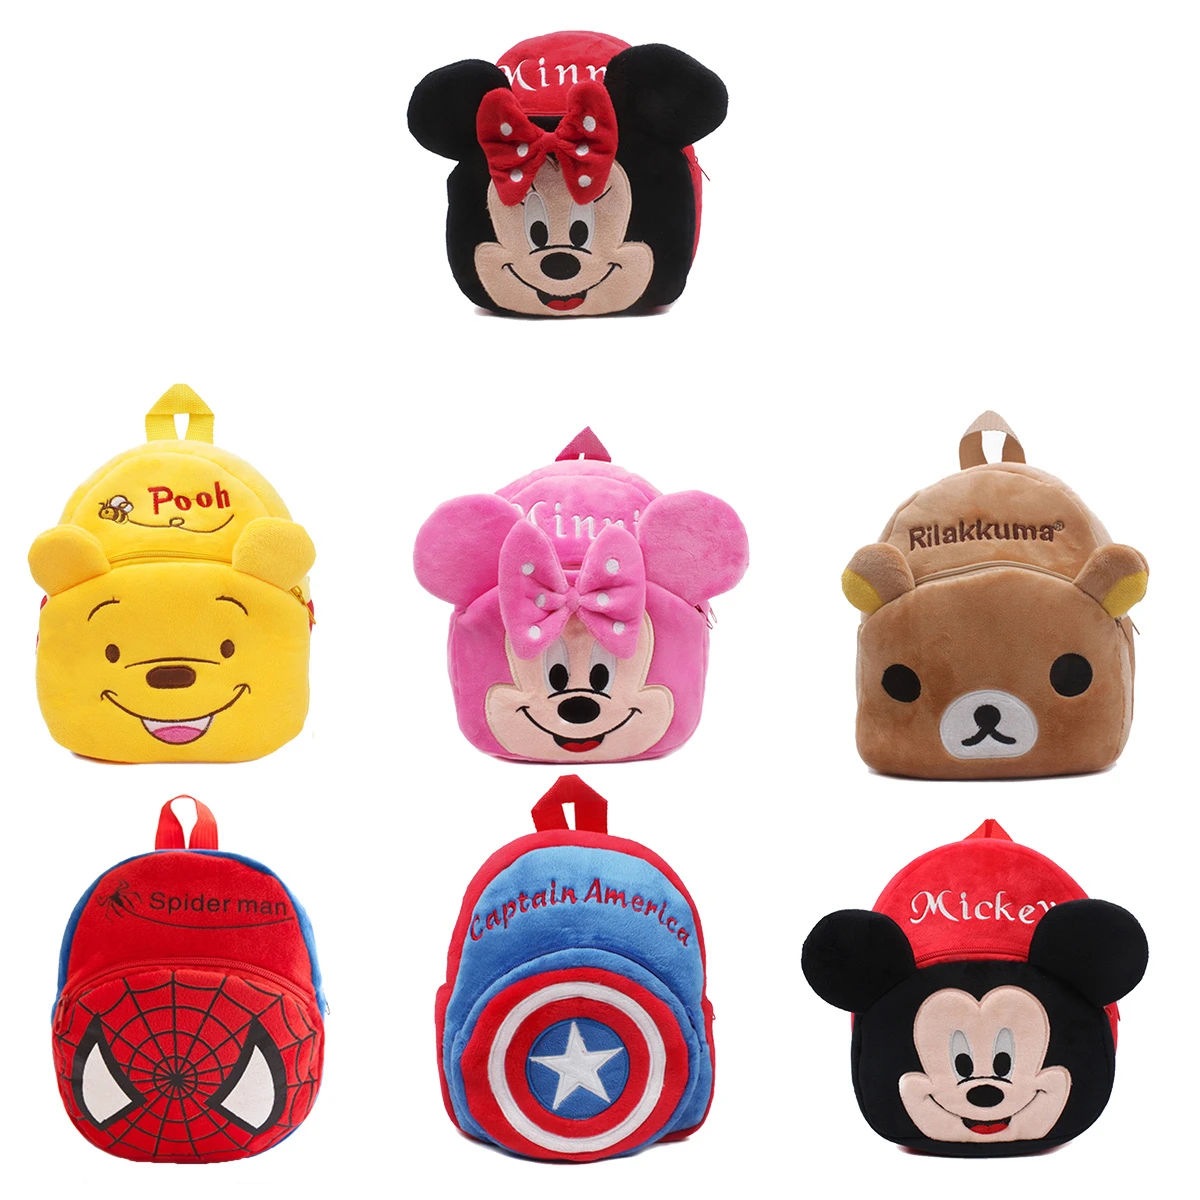 2021 NEW Disney marvel Avengers spiderman KT mickey mouse Minnie Winnie the Pooh stitch Plush backpack Kids baby school bag